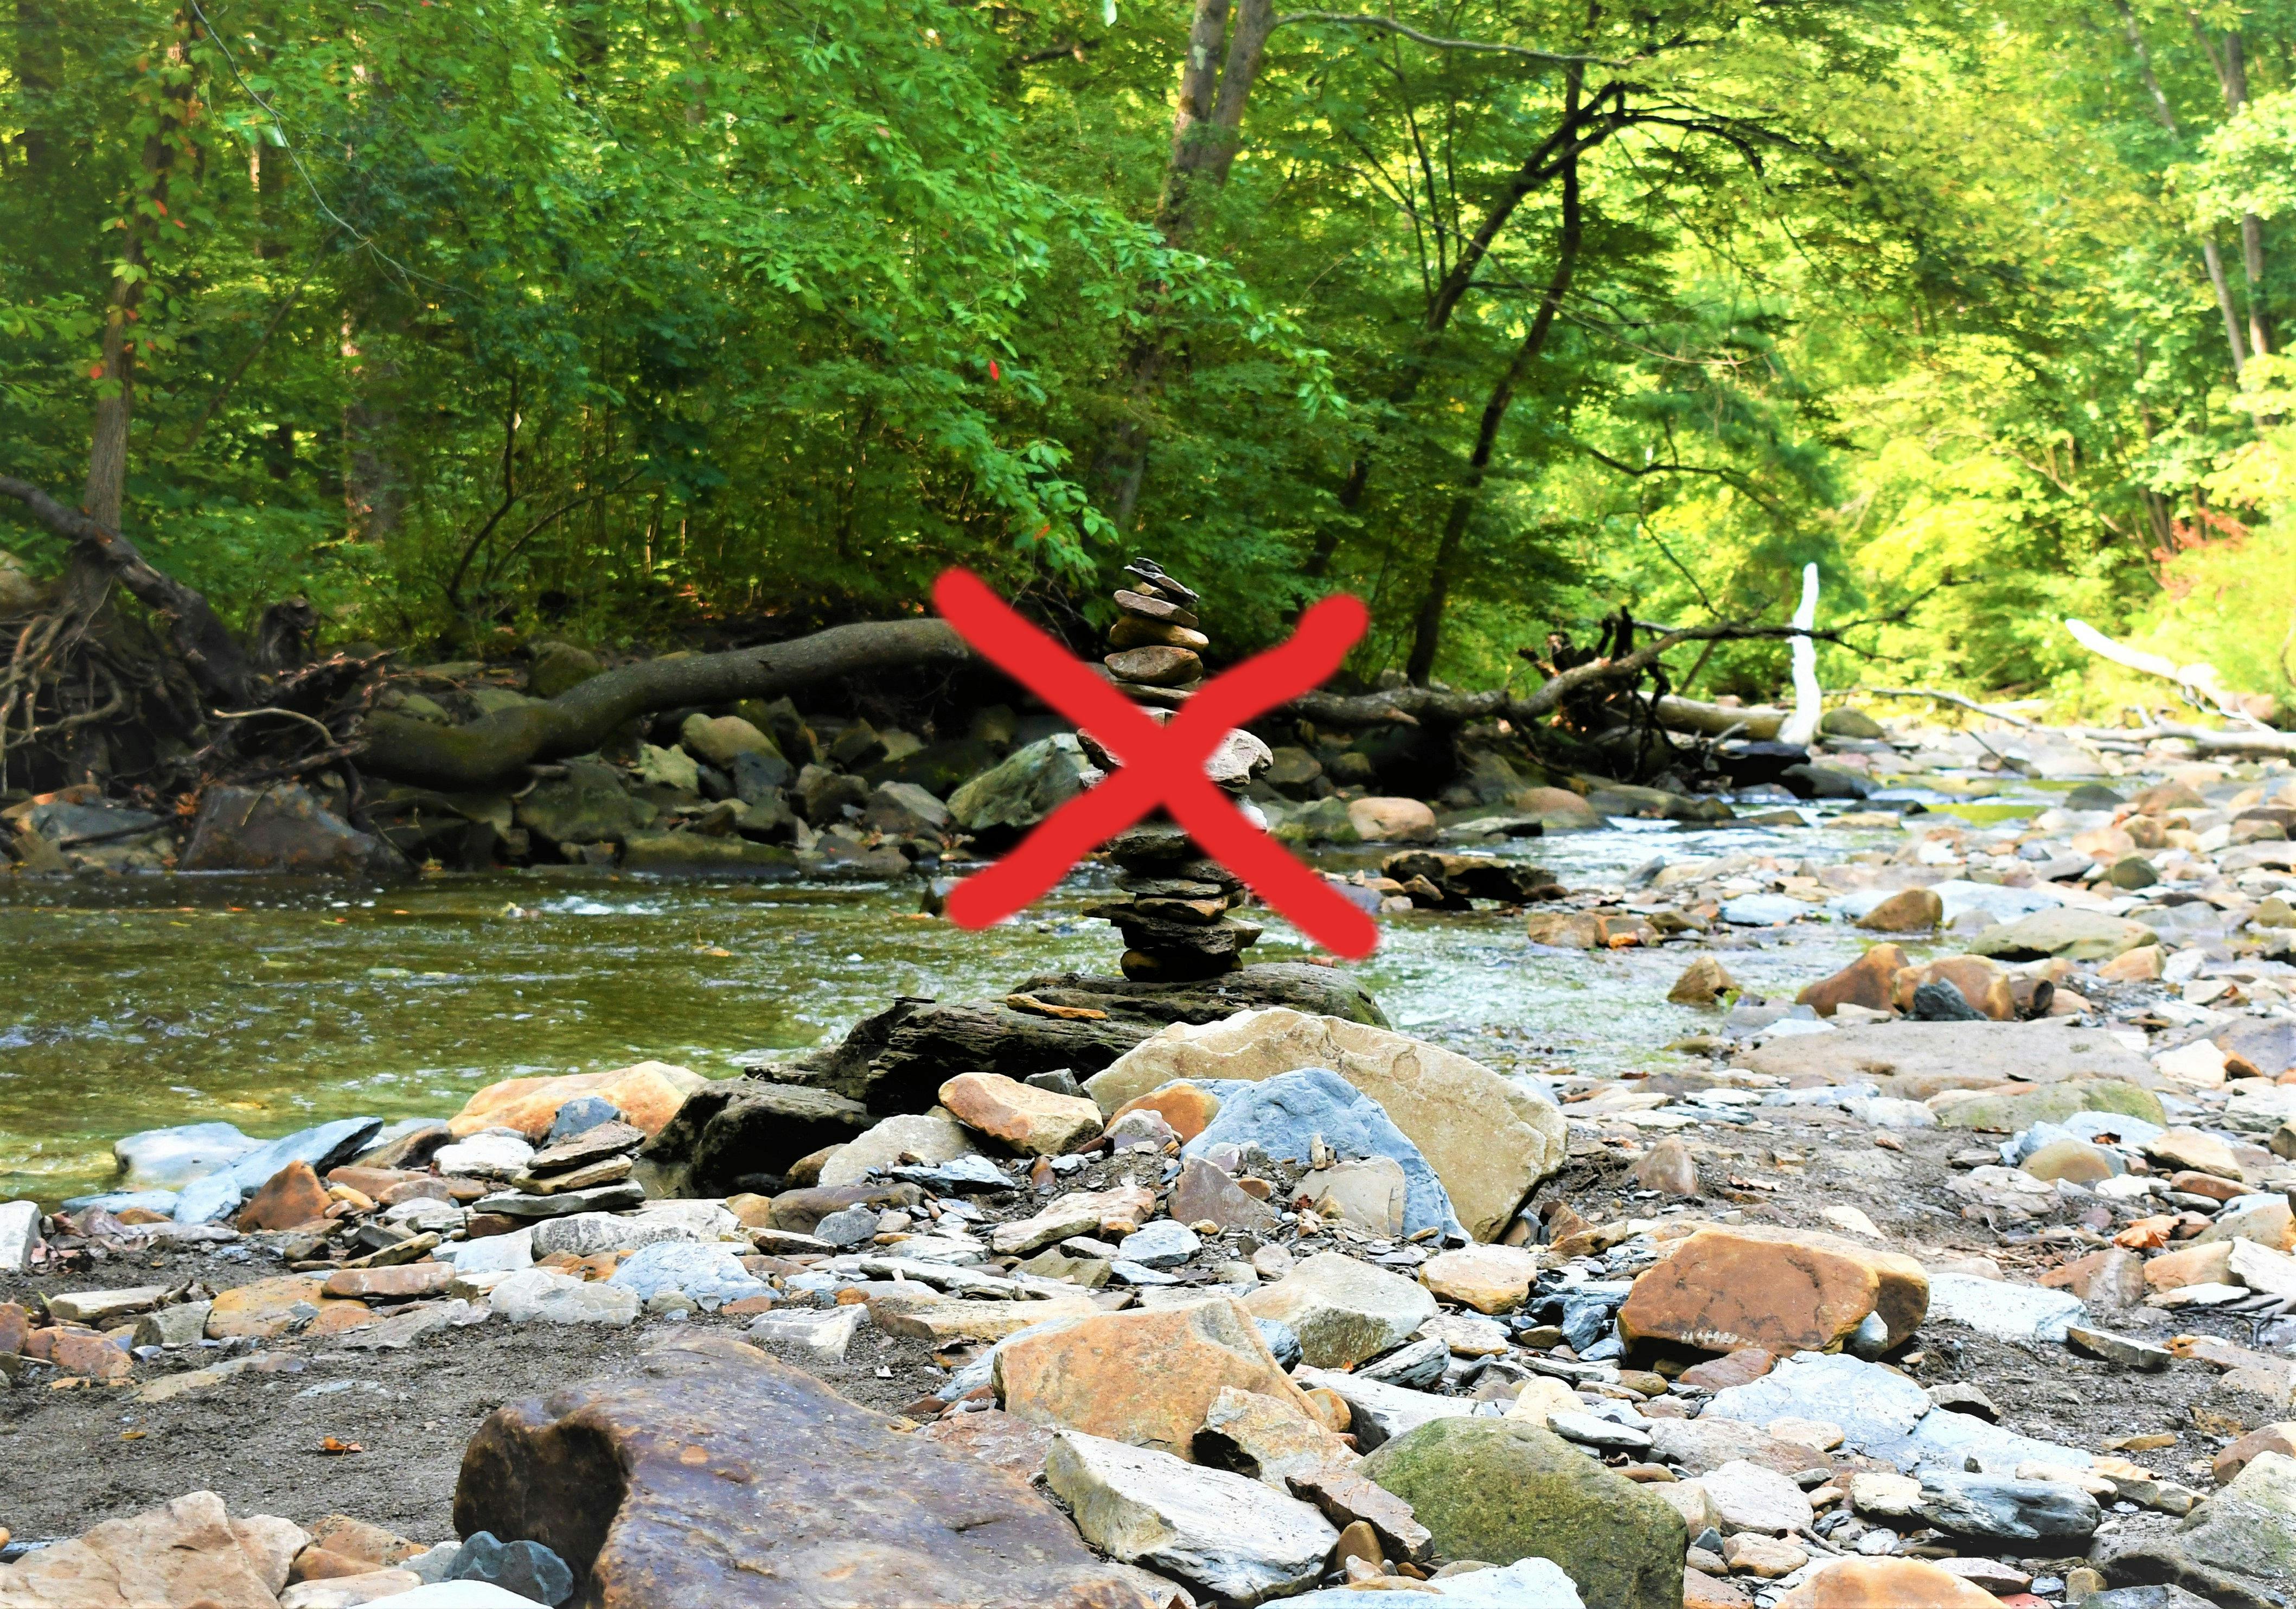 An image of a creekside cairn has been edited with a hand-drawn red X over the cairn--indicating the author's stance on Leave No Trace Principles. 